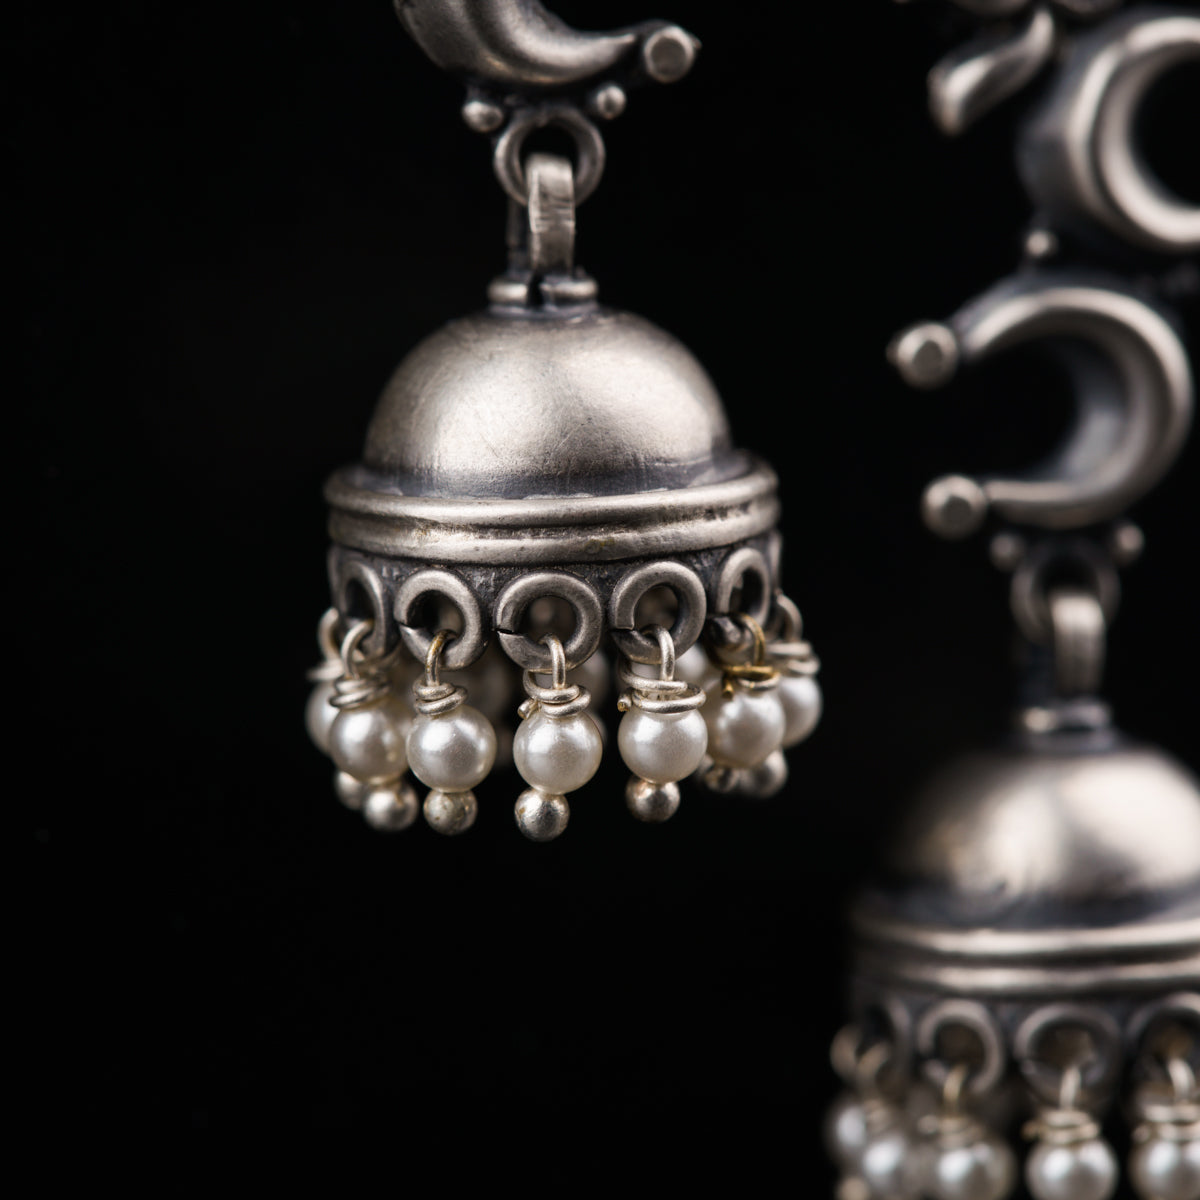 a pair of silver bells with pearls hanging from them